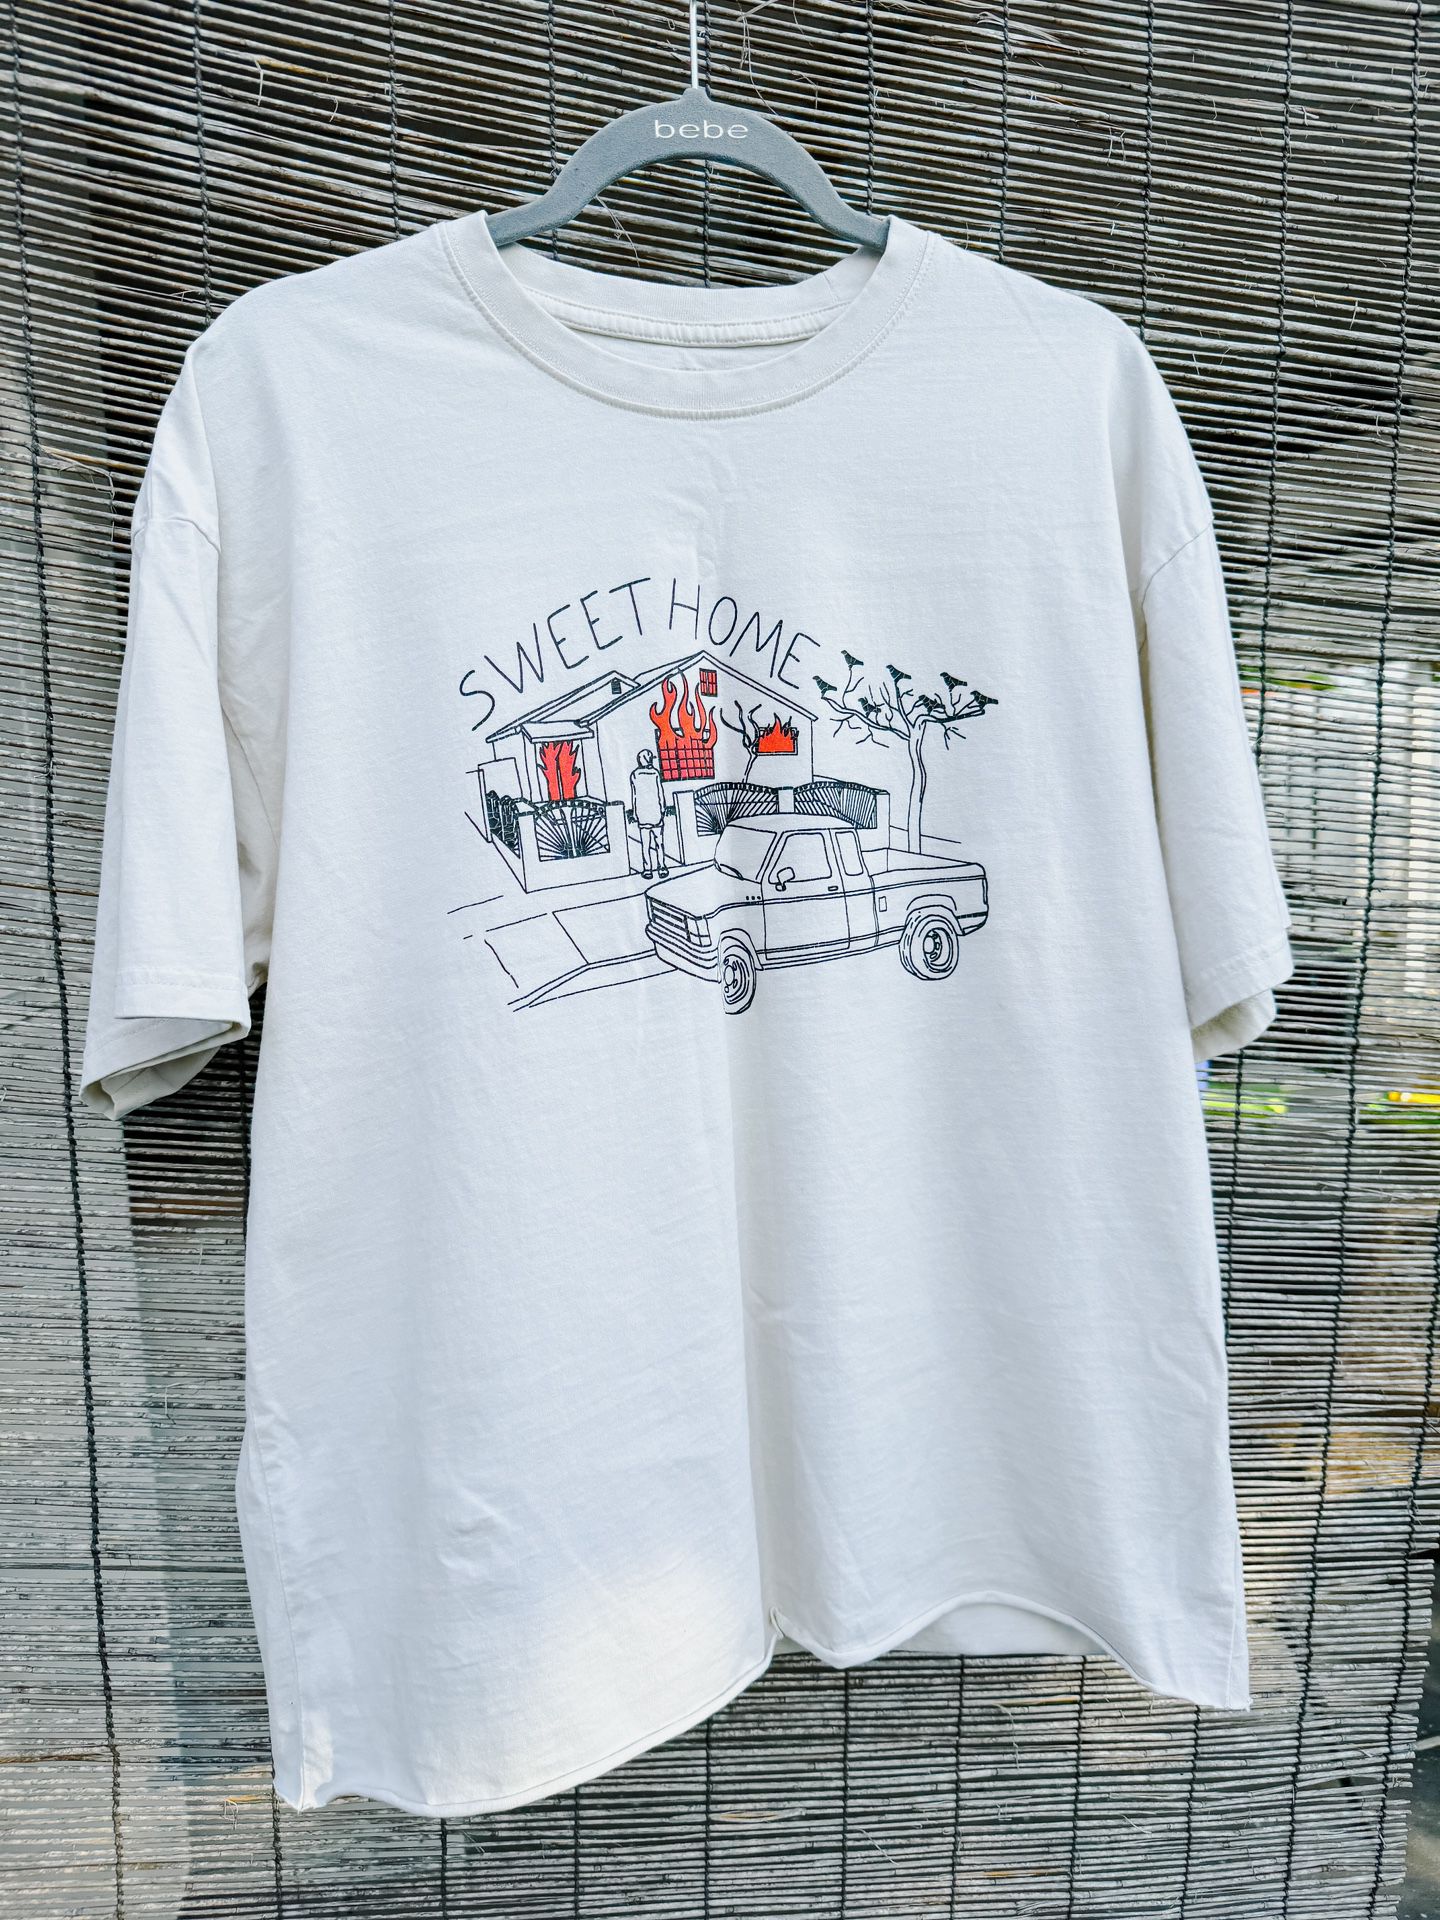 Pull & Bear  T-Shirt Sweet Home, Crop ~ Size L, Beige Color